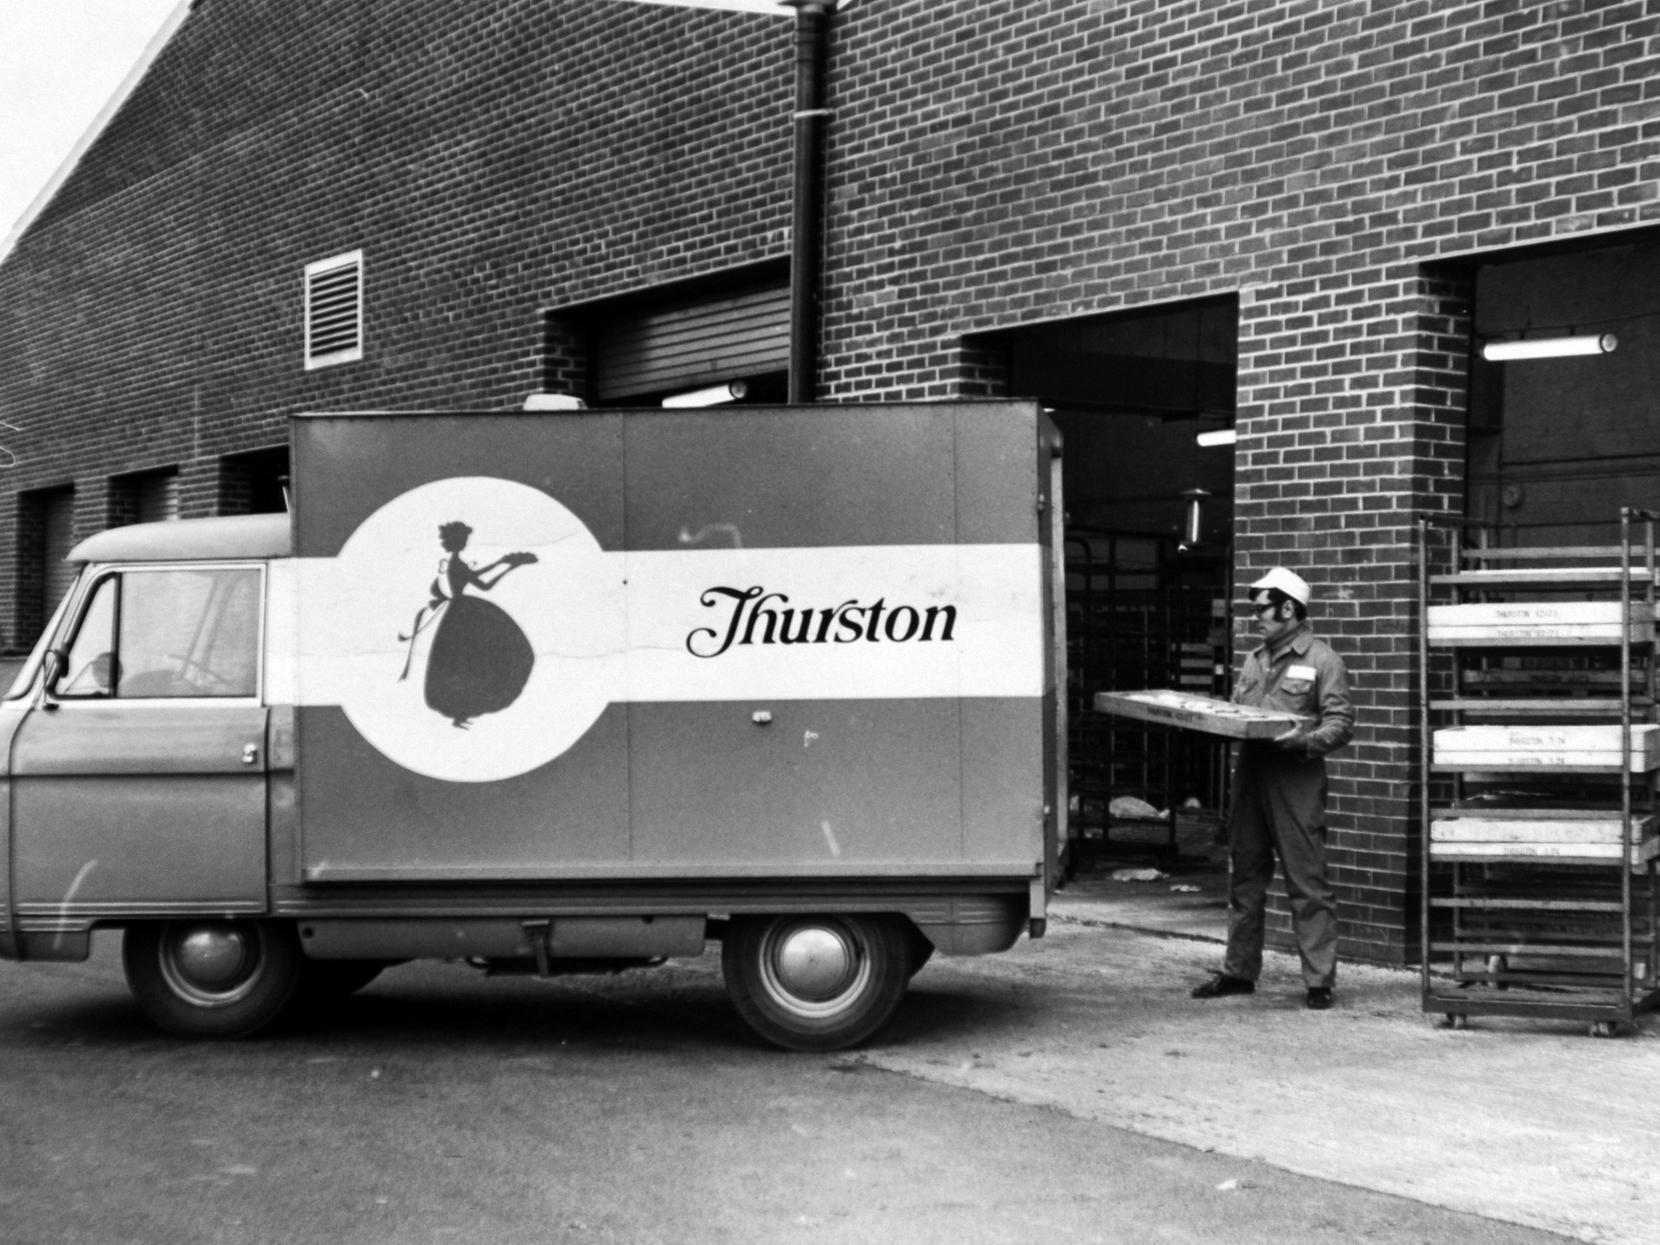 A van is loaded with freshly baked supplies at the new Thurston Bakery at Bramley in October 1974.